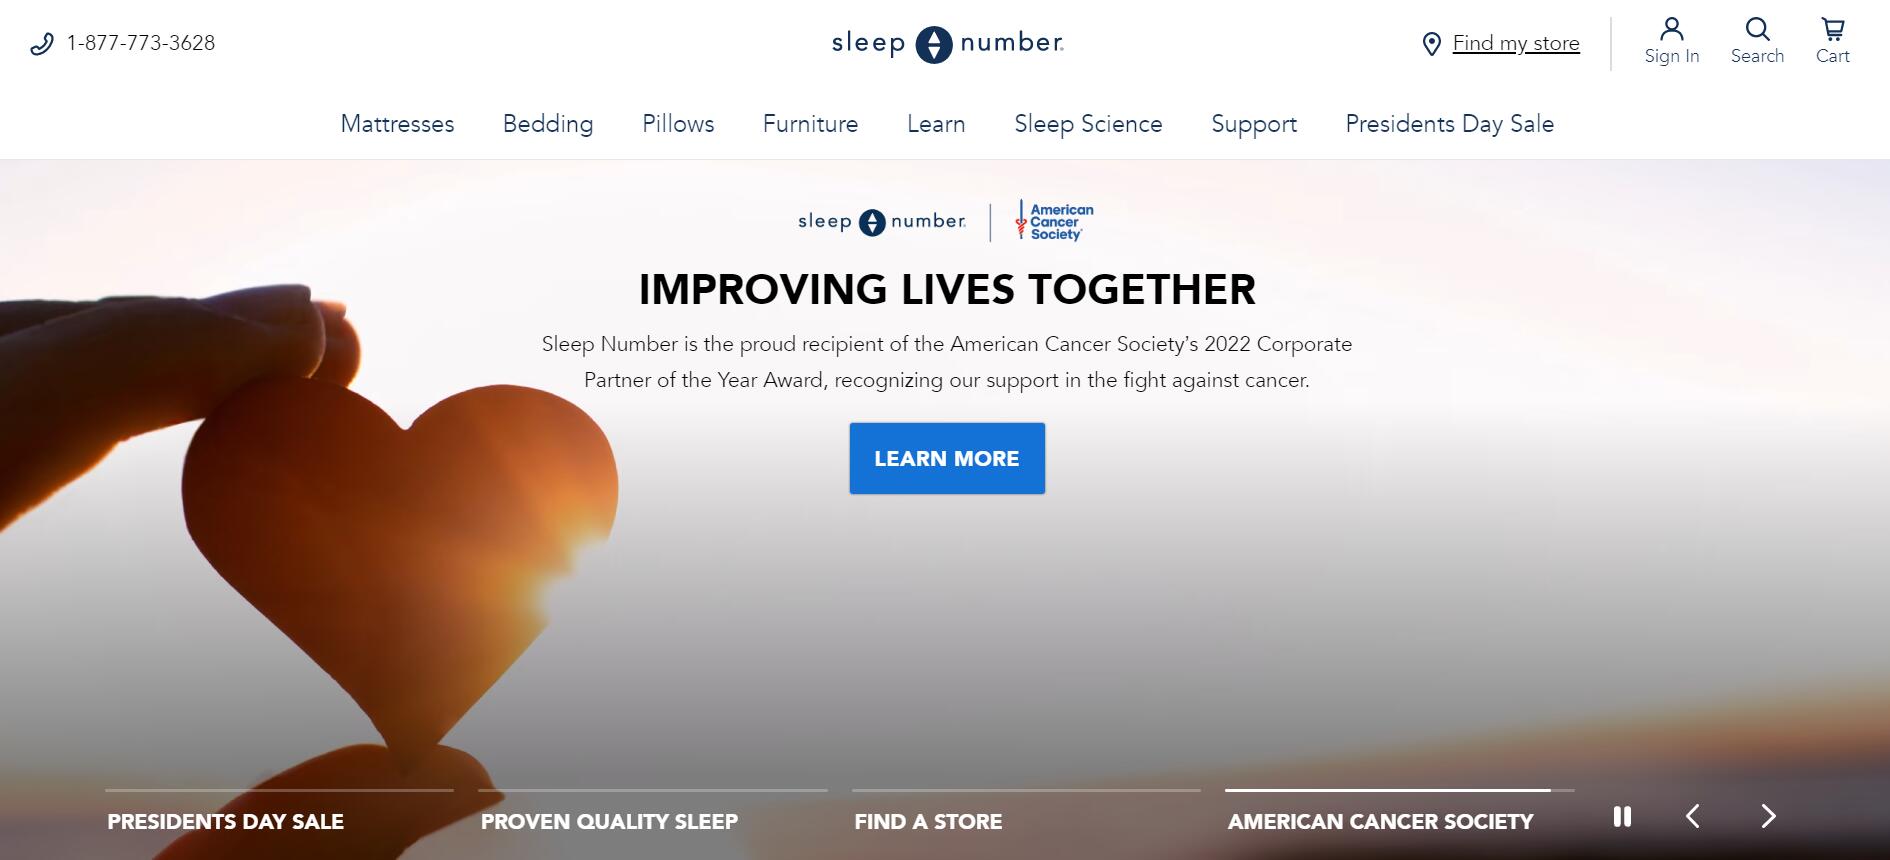 Sleep Number Saw FY 2022 Net Sales Decline 3% and Improved Demand to Start FY 2023